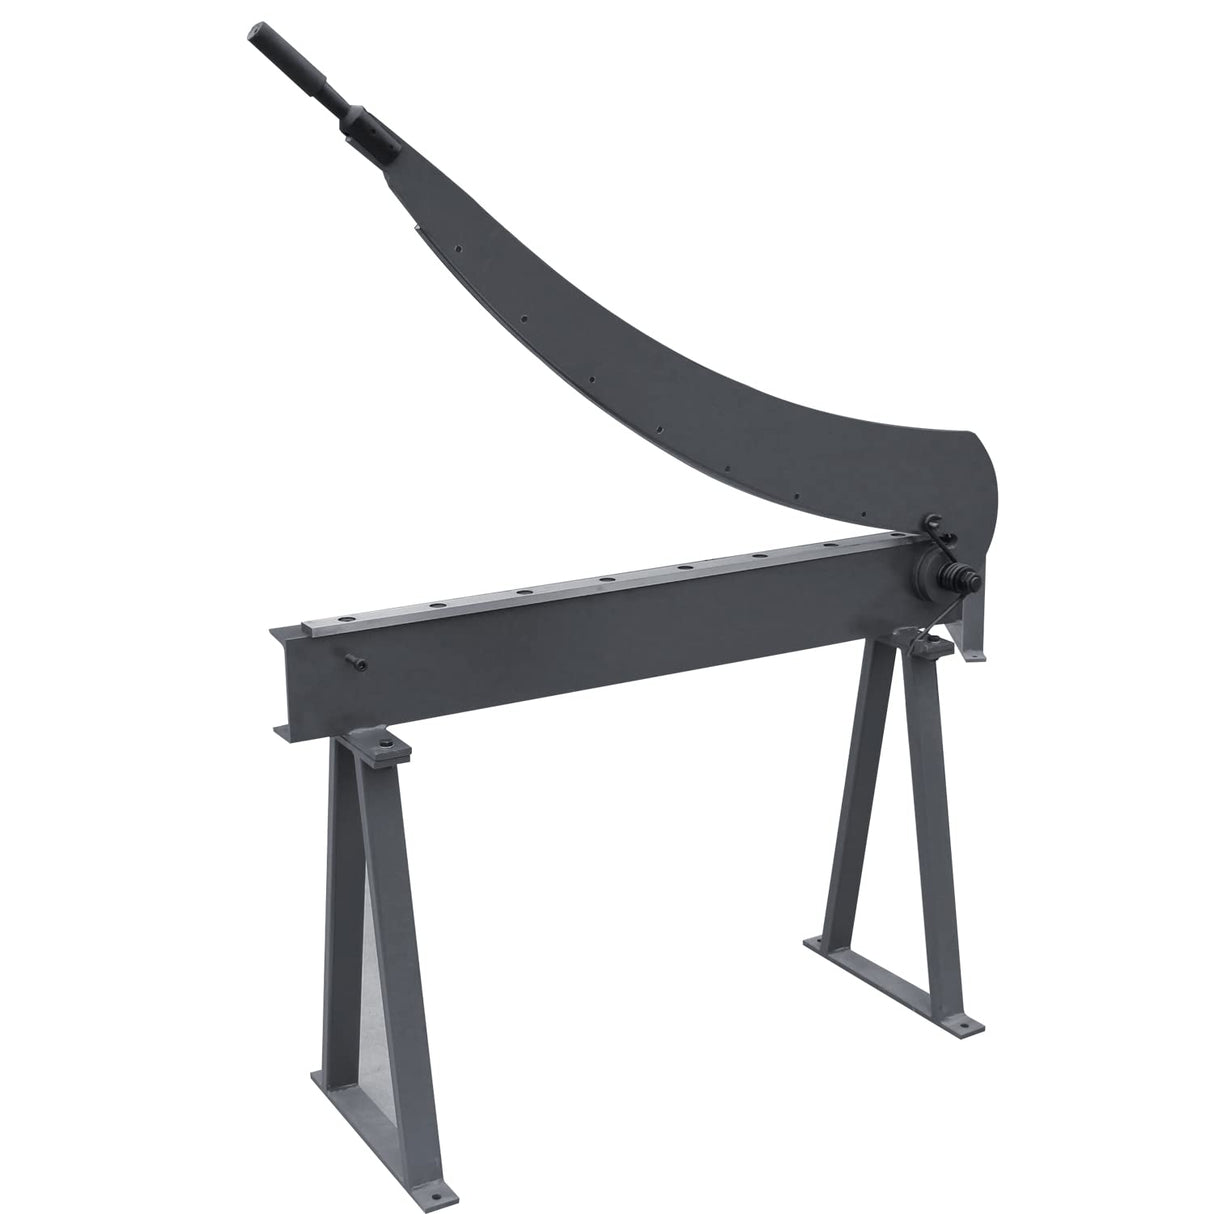 KANG industrial HS-40 Guillotine Metal Shear, 1000mm Bed Width, 16 Gauge Metal Shear with a Stand for Sheet Metal Fabrication Plate Cutting Cutter